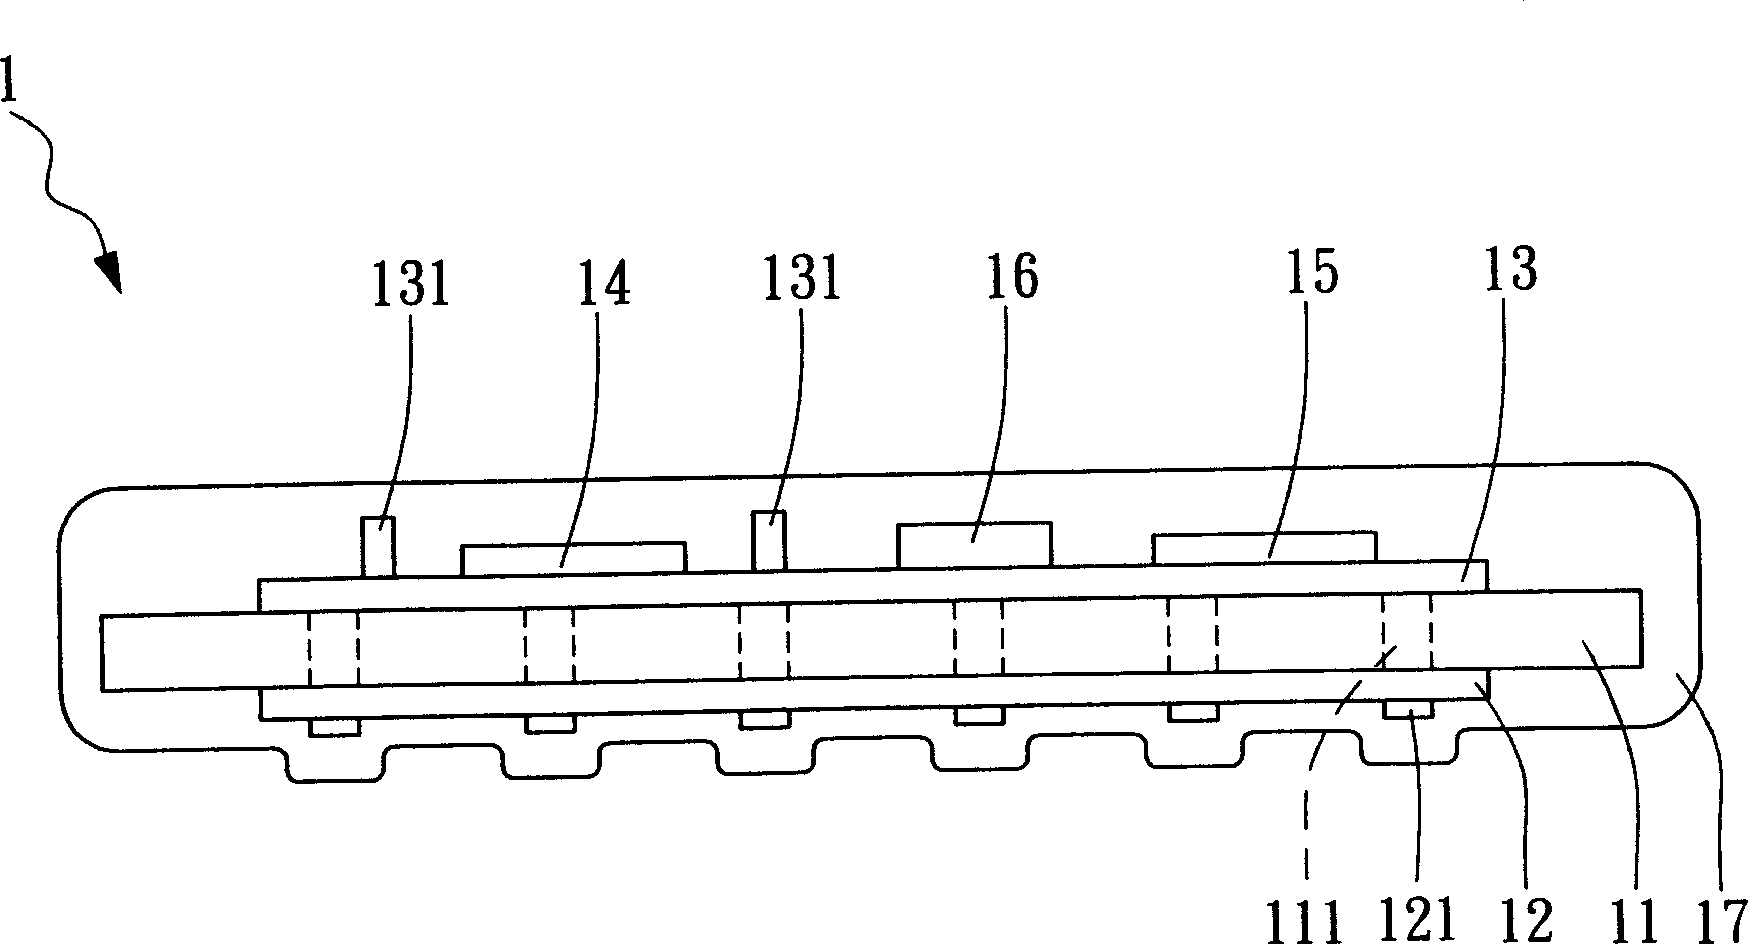 Soft physiological signal monitoring device